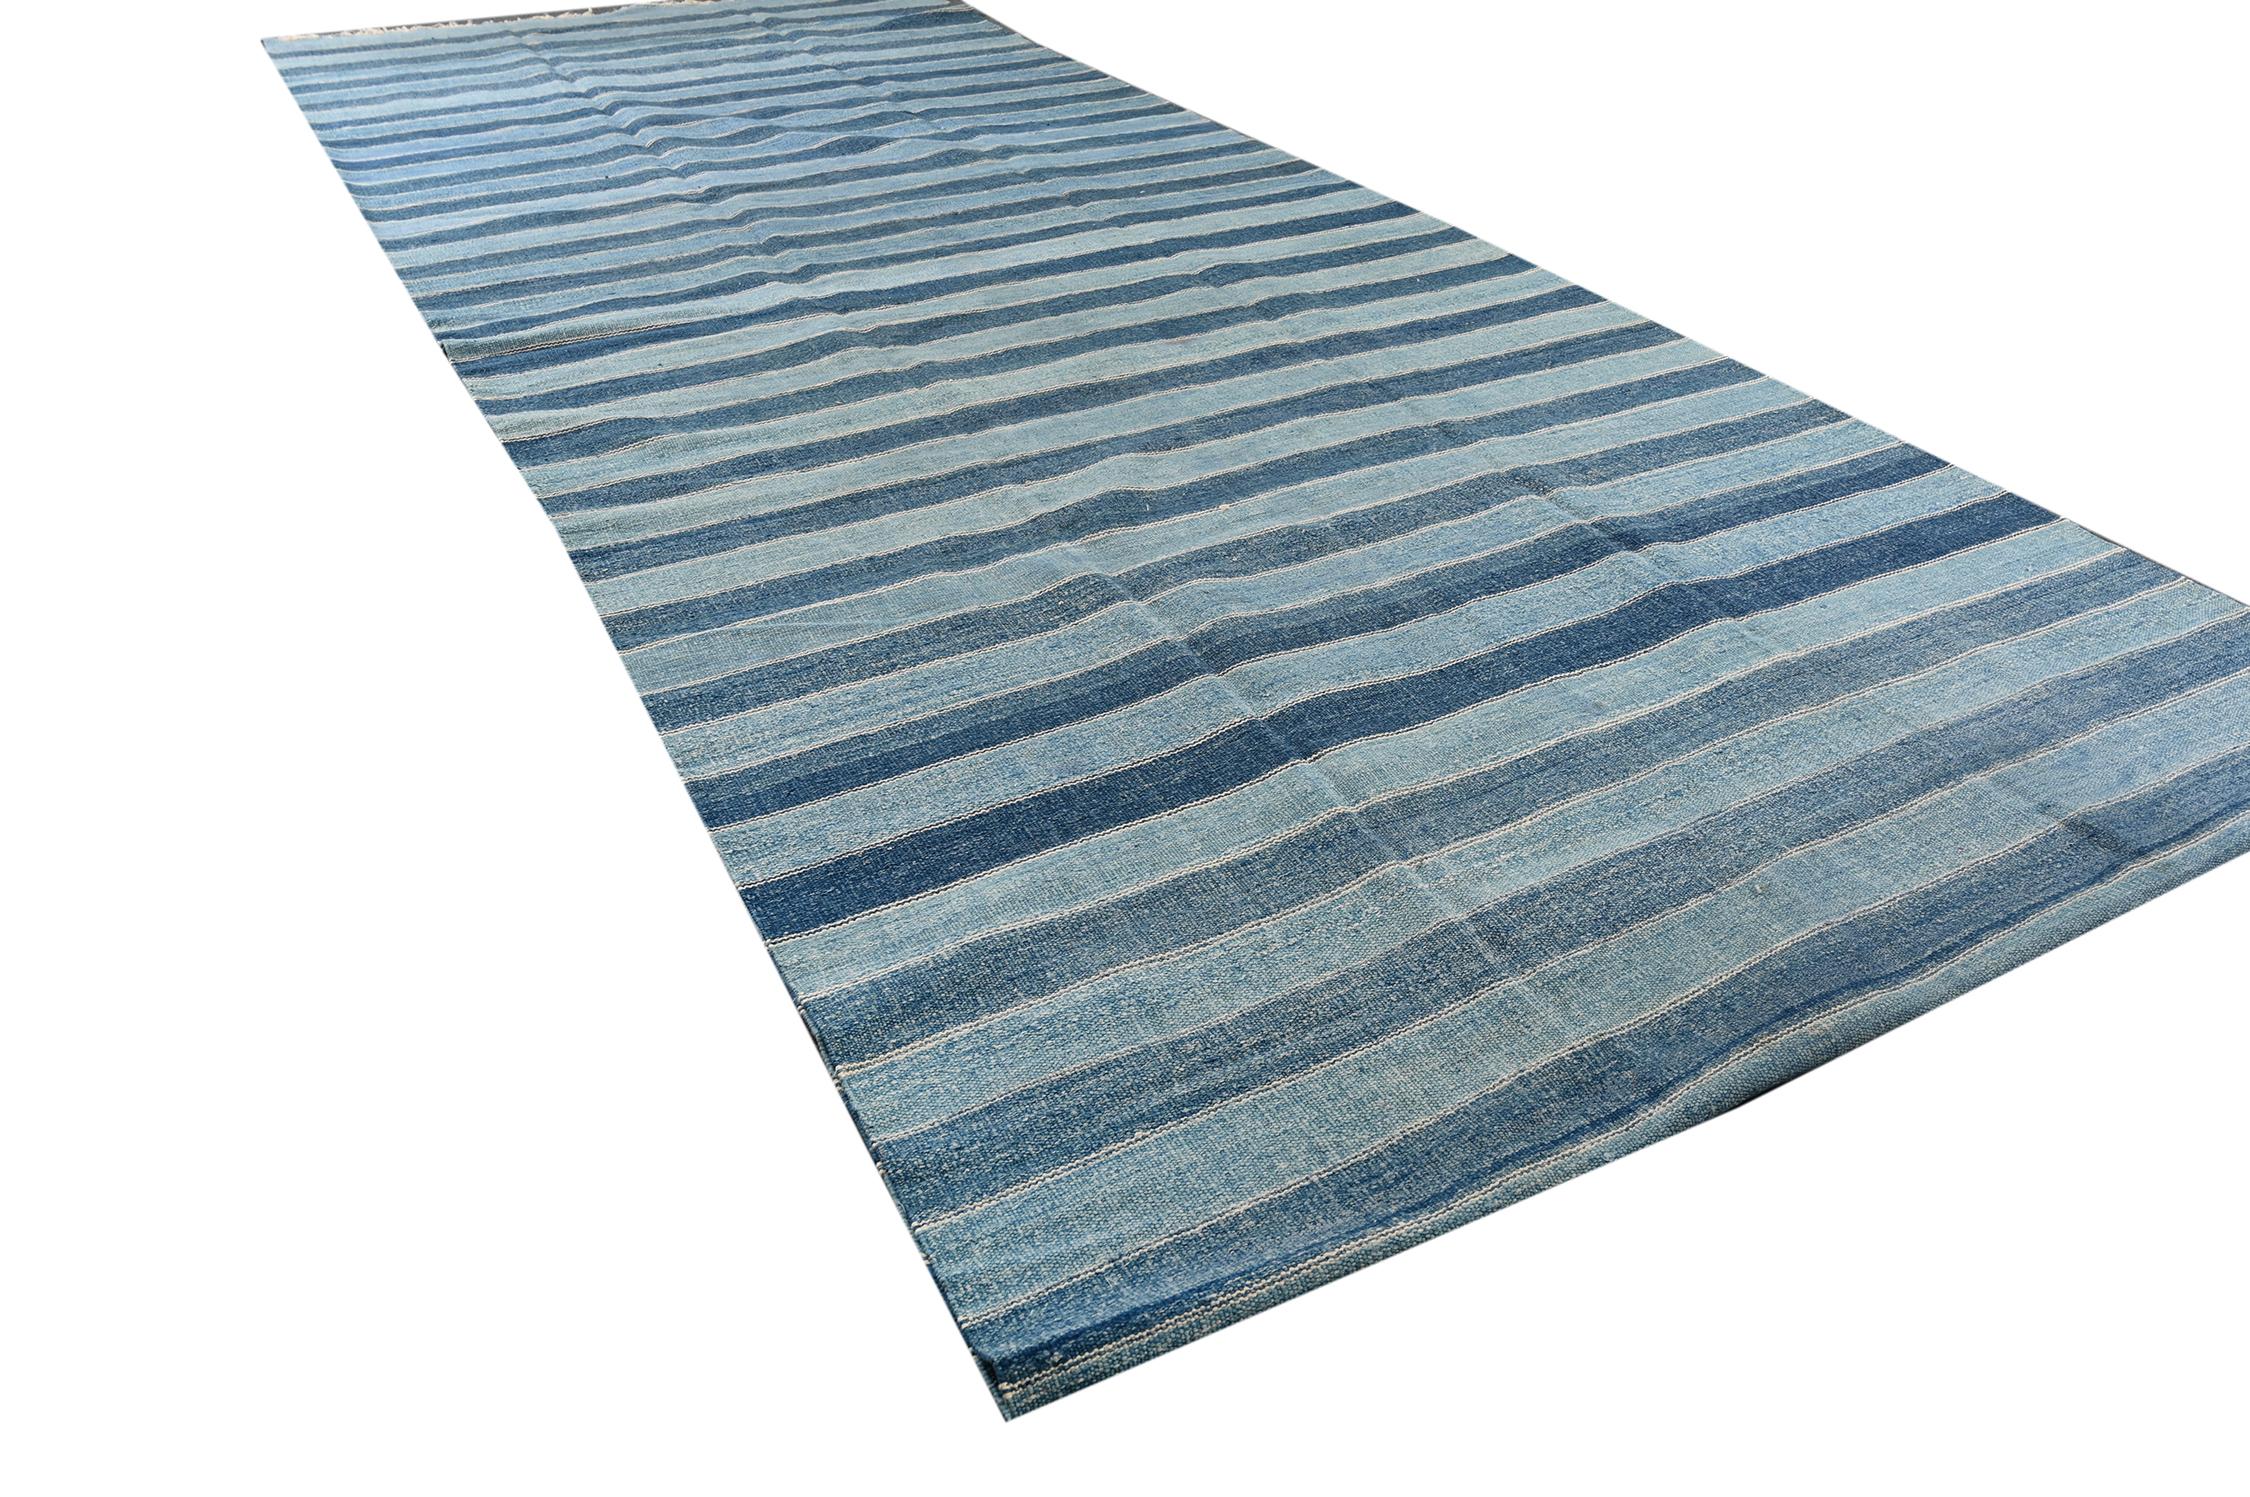 Indian Extra-Long Vintage Dhurrie Flat Weave in Blue Stripes by Rug & Kilim For Sale